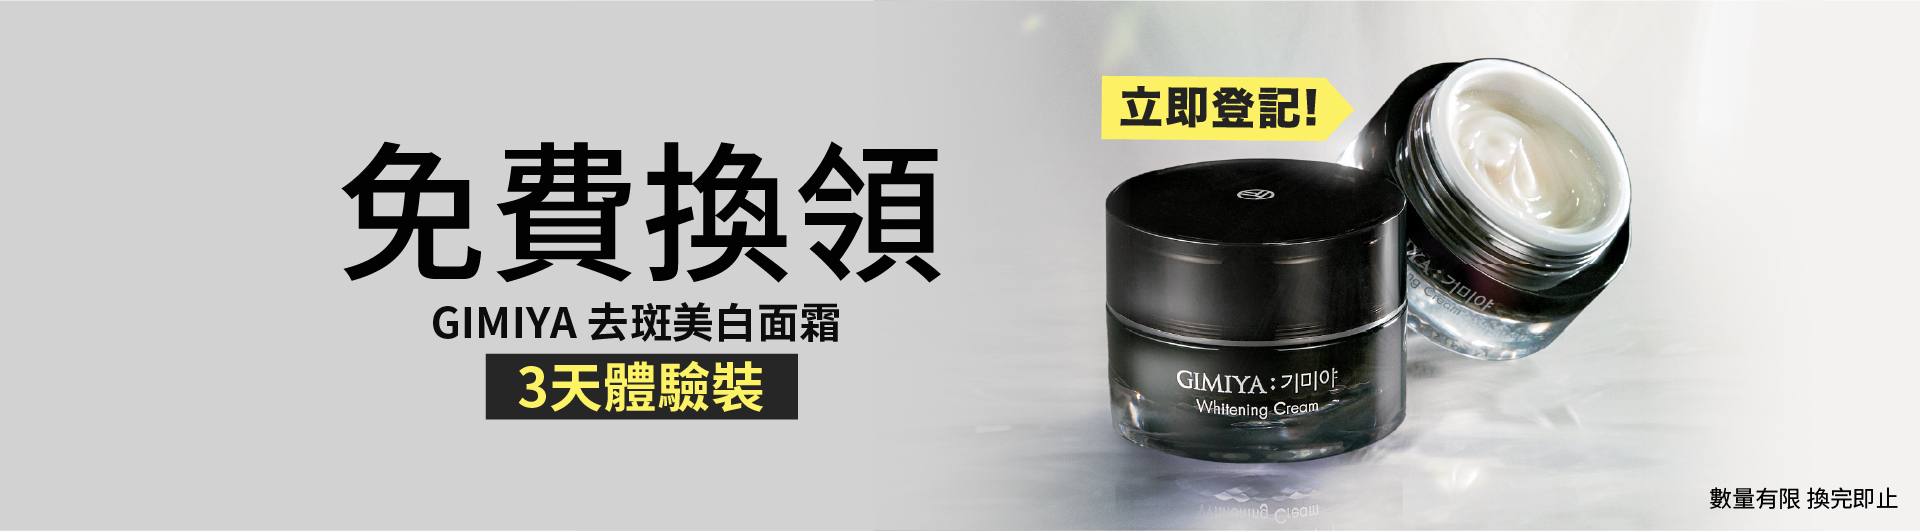 [Event Ended] GIMIYA Whitening Cream Sample Redemption Event